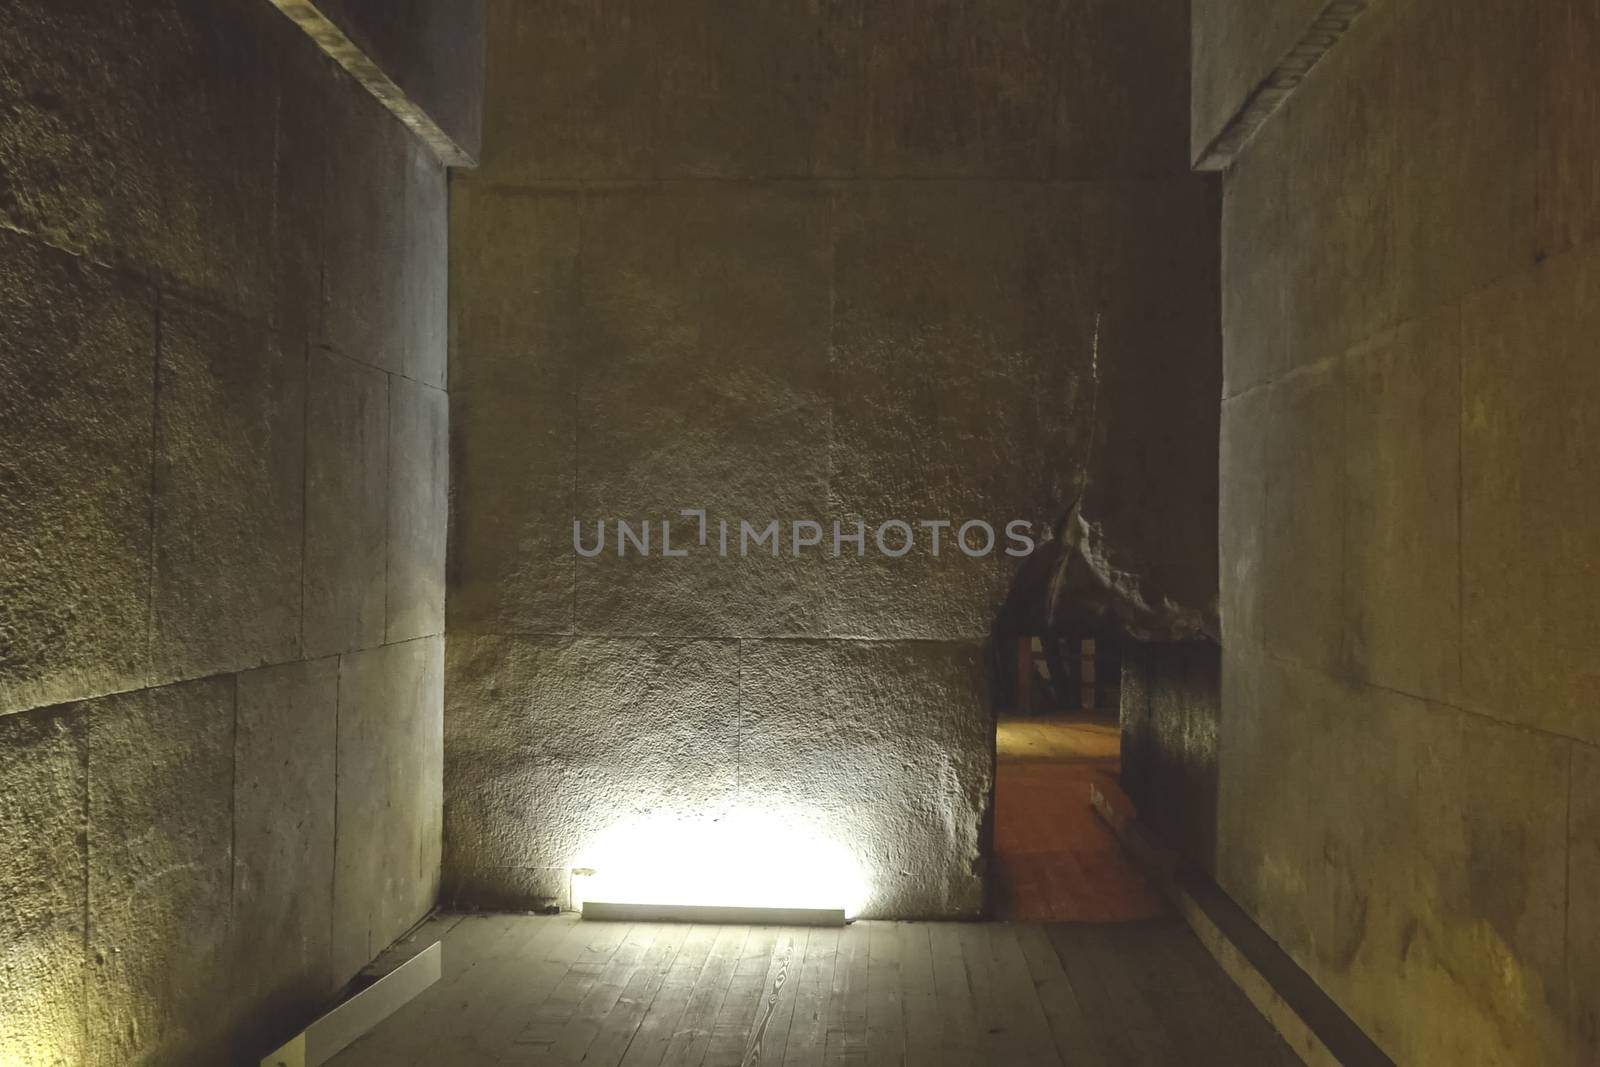 Big pyramids of Egypt. Inside the large pyramid. Inside the pyramid. Chambers and corridors.